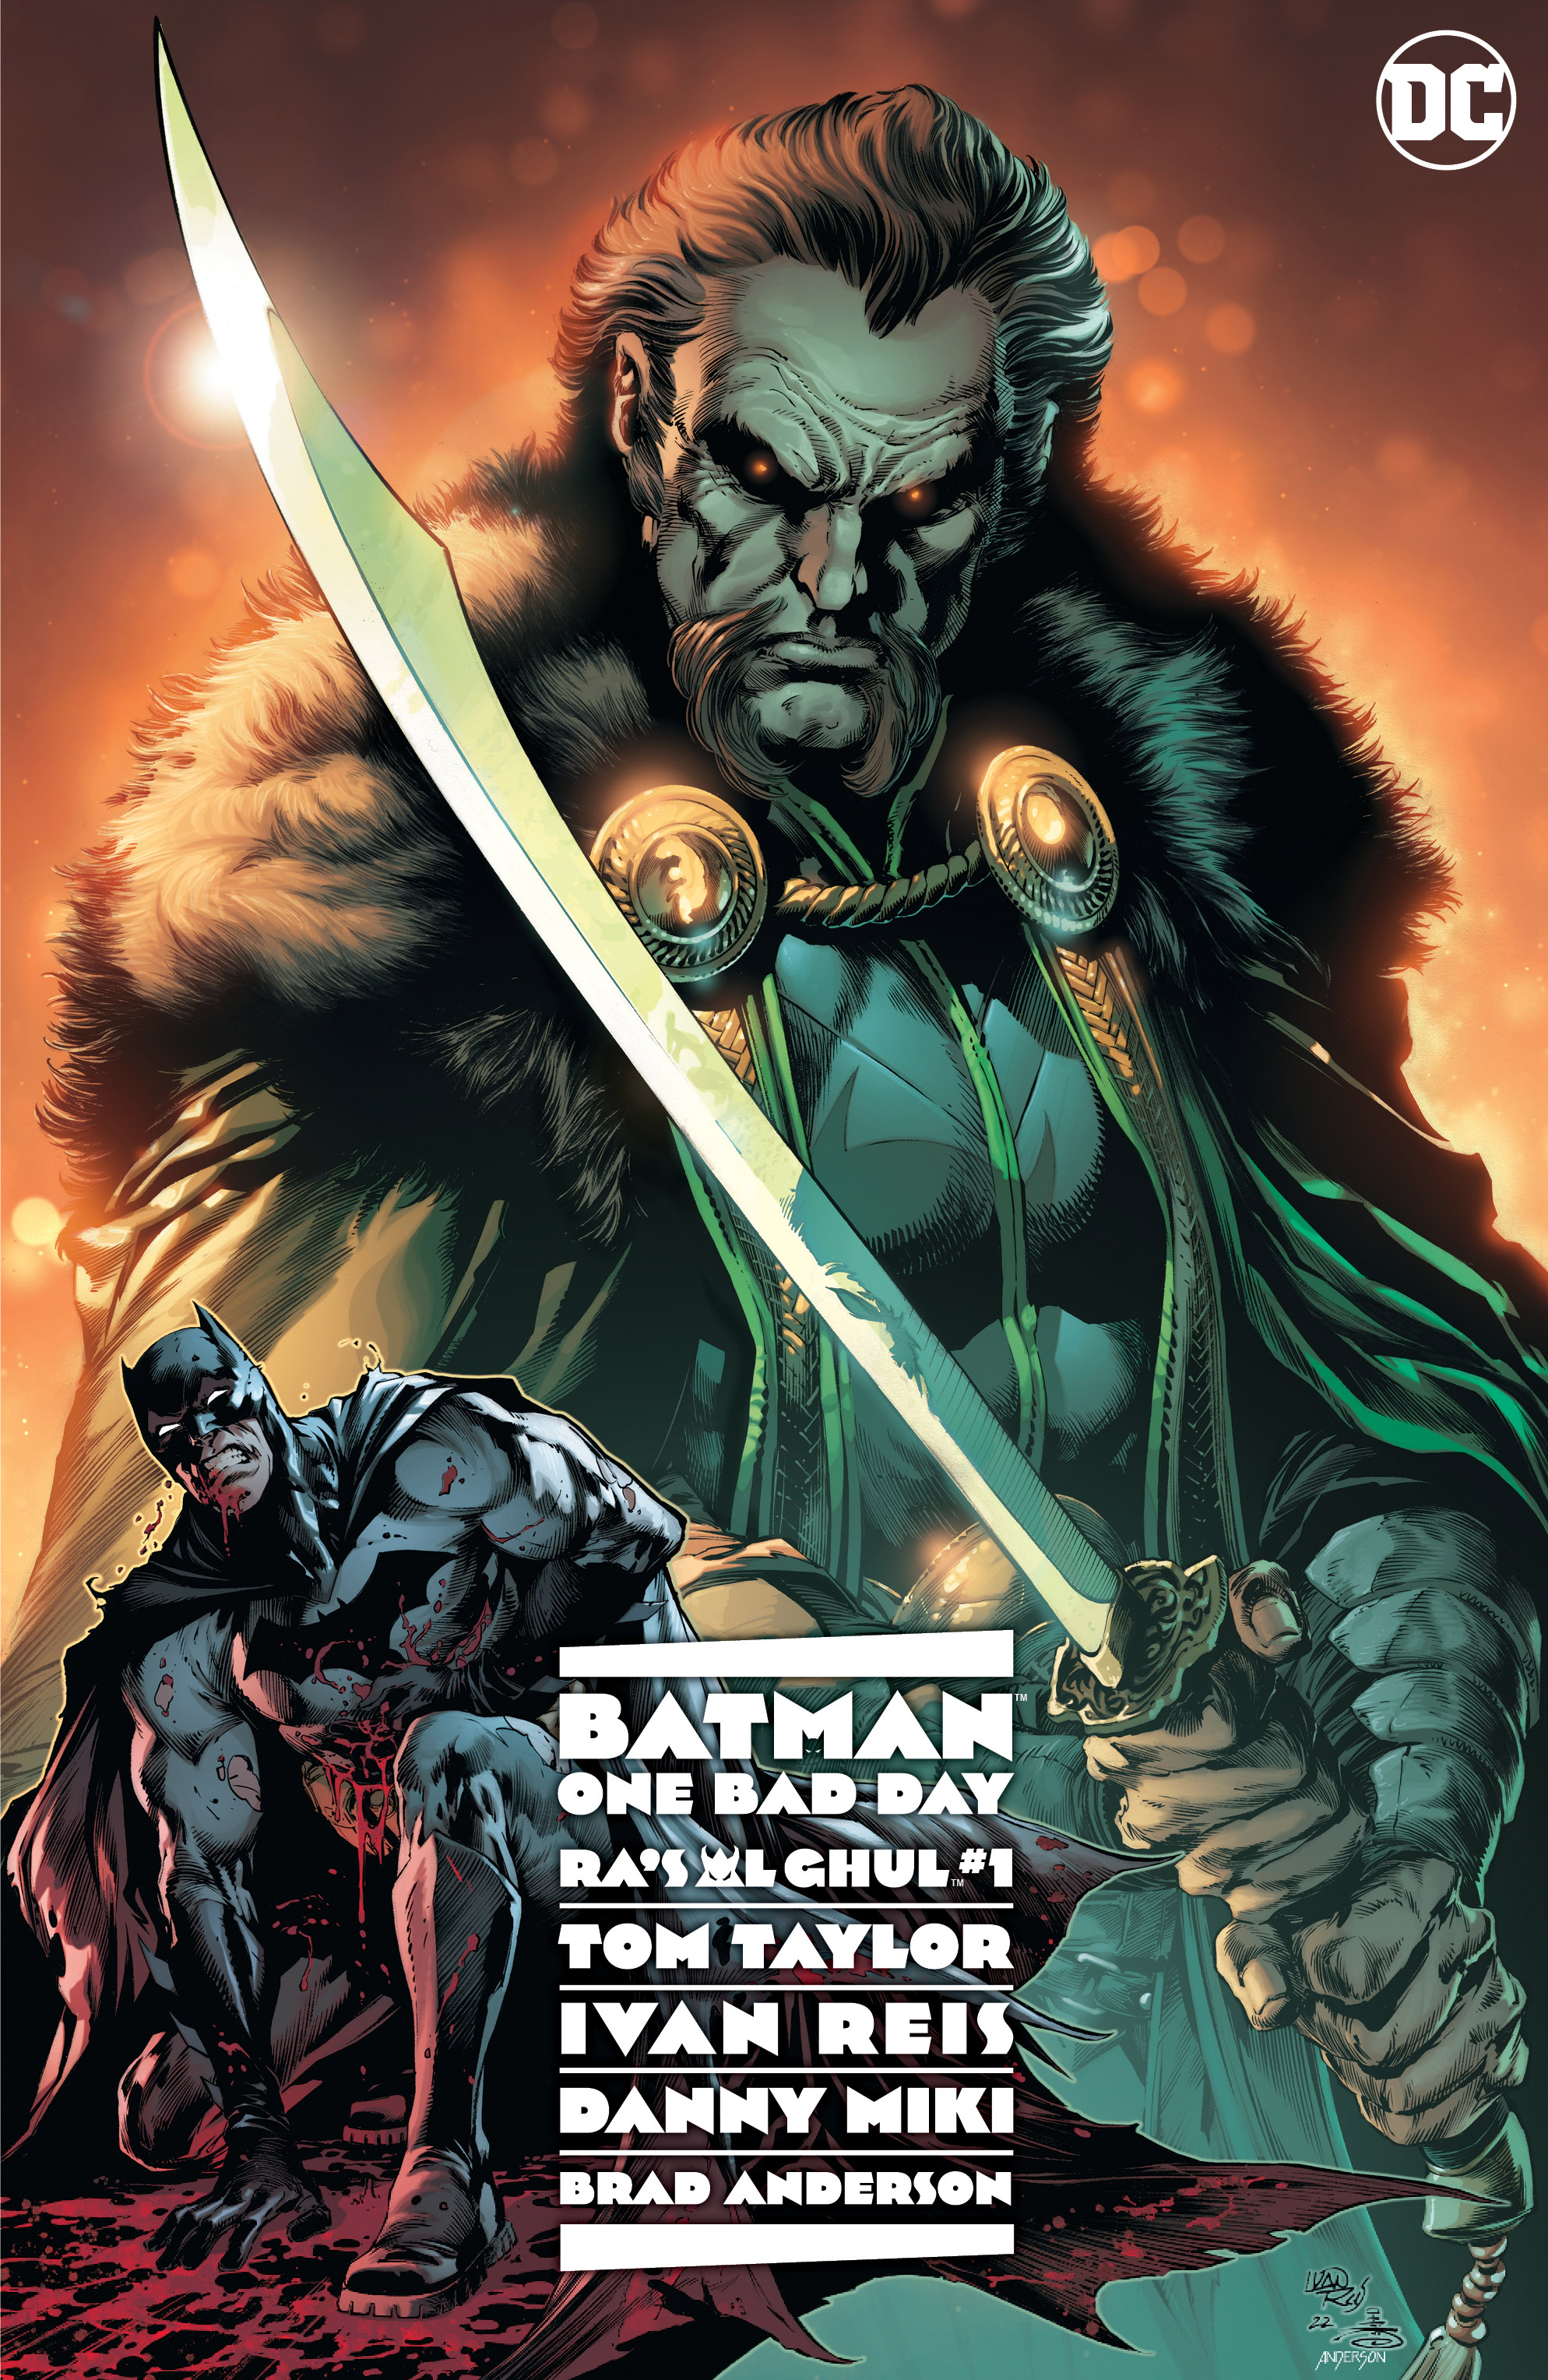 DC: Batman: One Bad Day: Ra's Al Ghul: One-Shot #1 (Cover A Ivan Reis &  Danny Miki) from Batman: One Bad Day: Ra's Al Ghul by Tom Taylor published  by DC Comics @